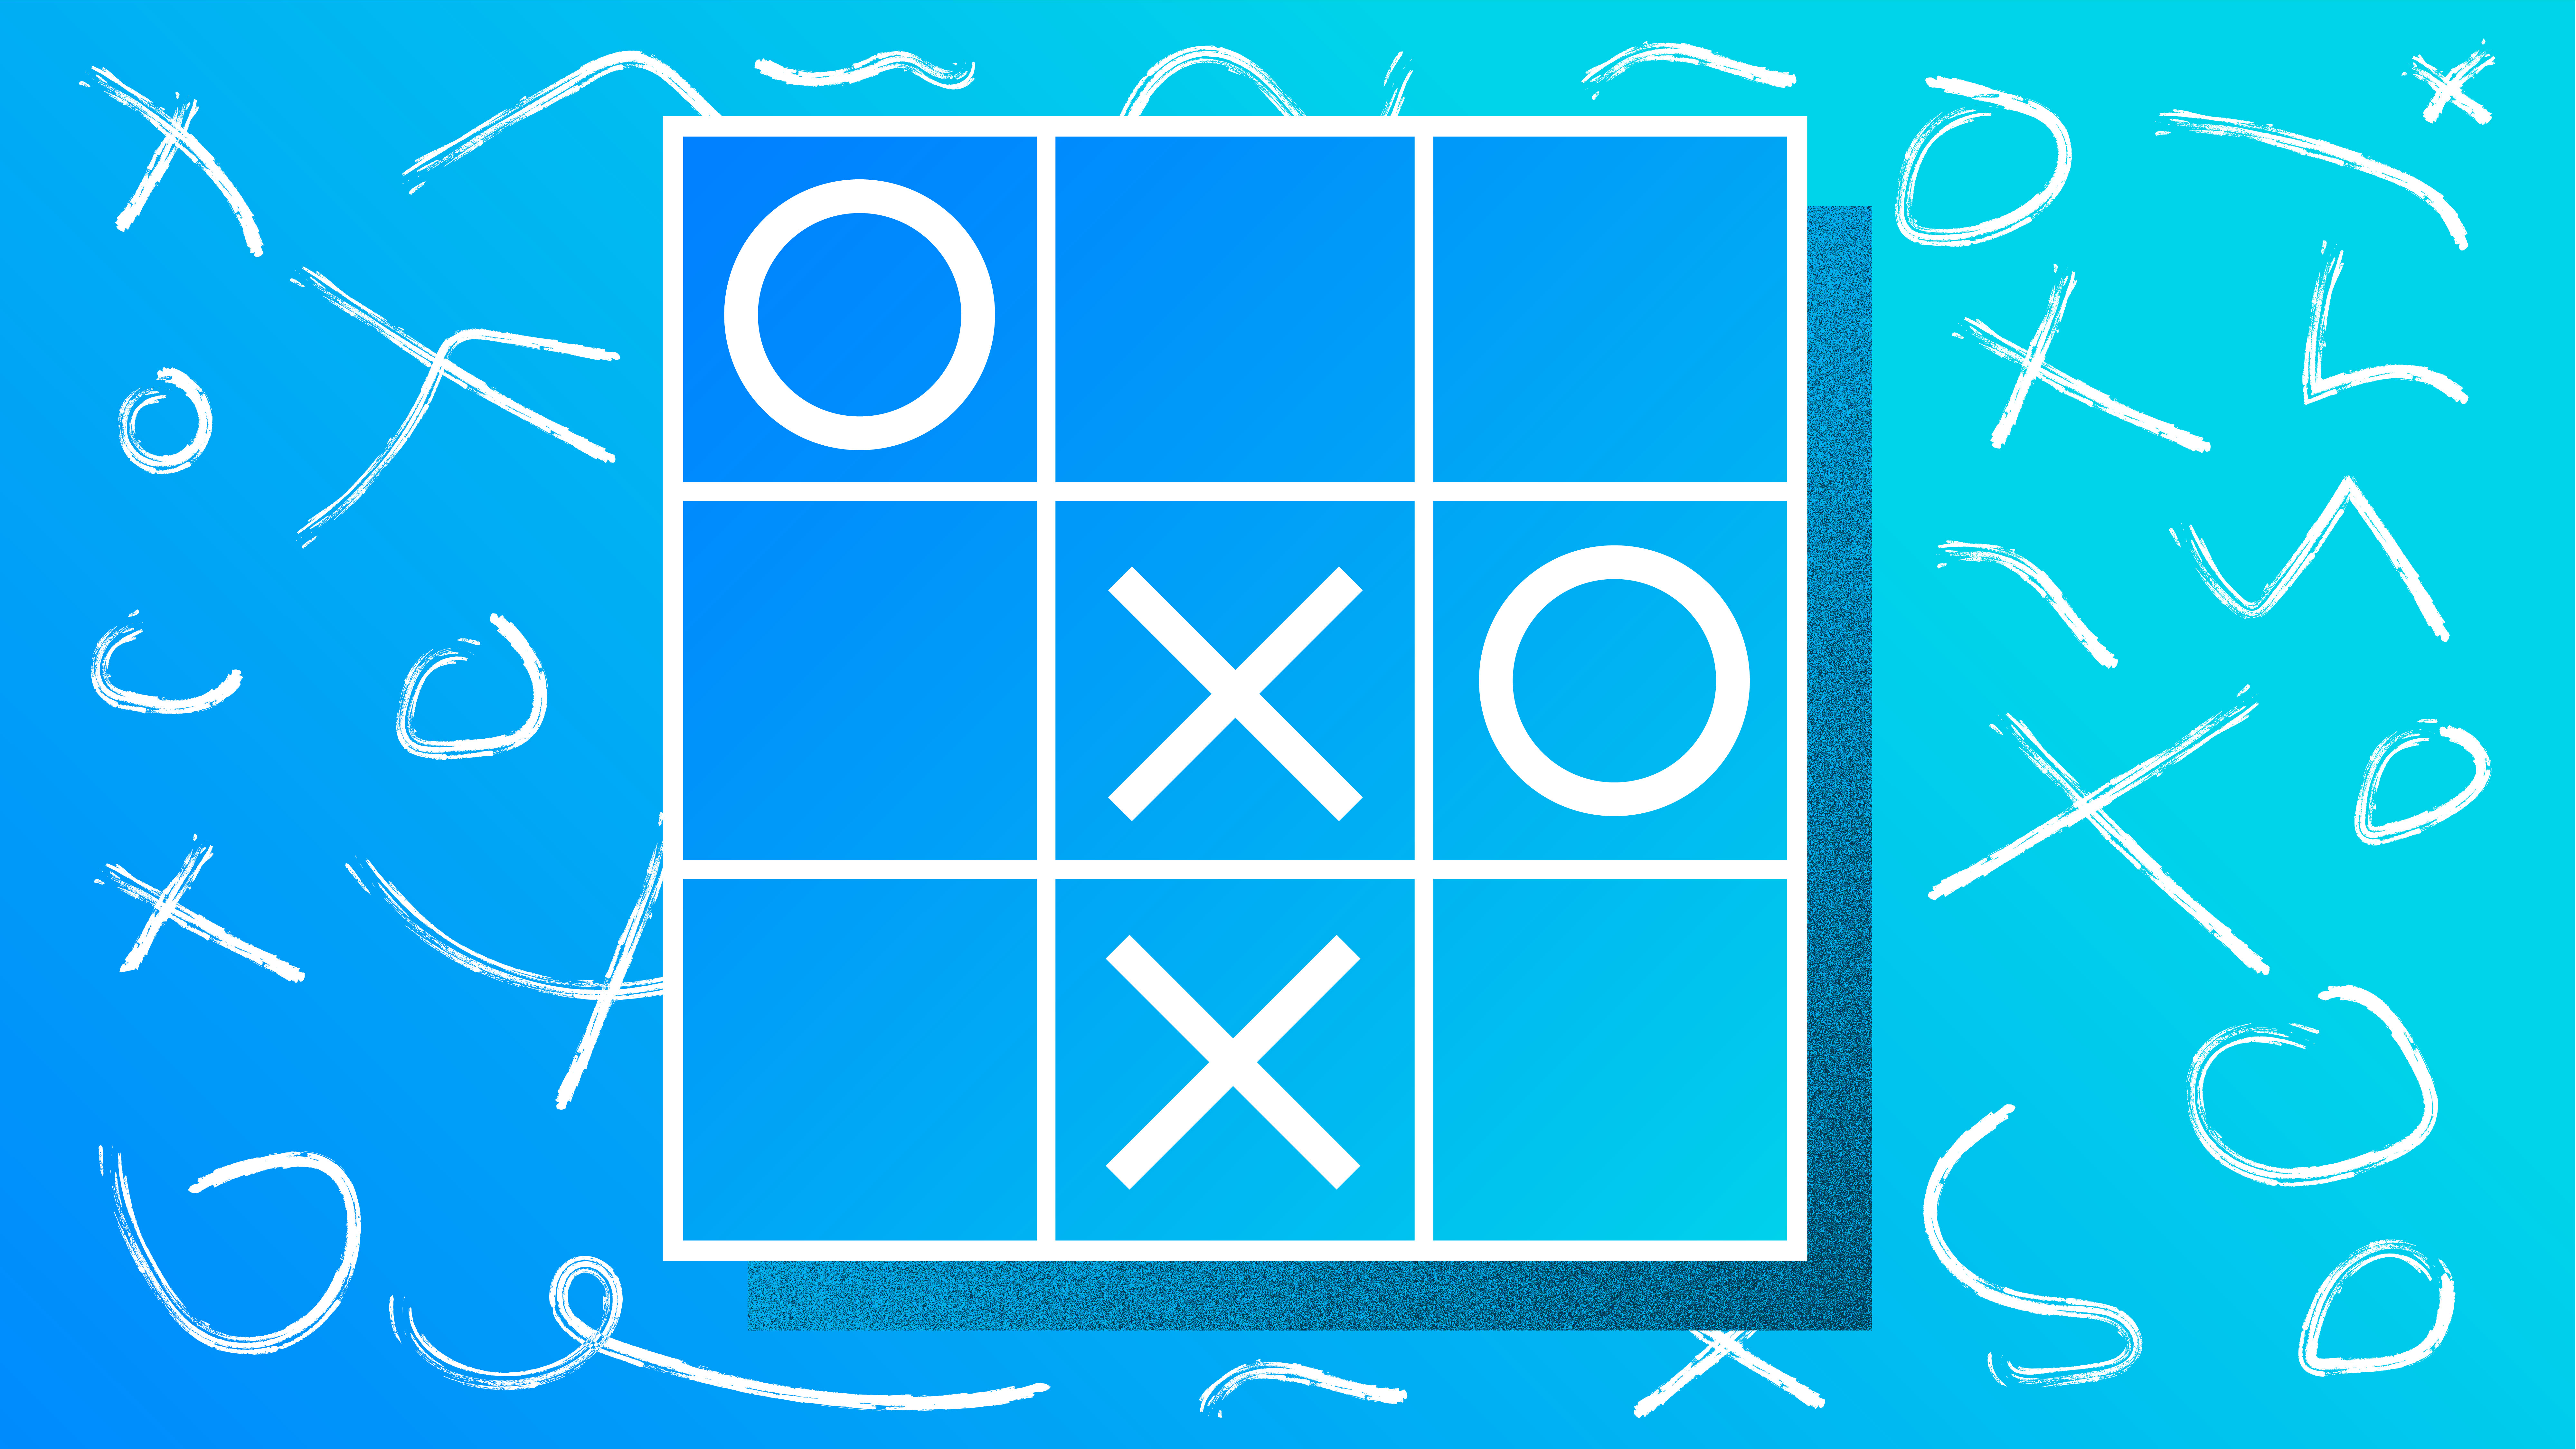 Tic-Tac-Toe Game Board: Evolution and Variations